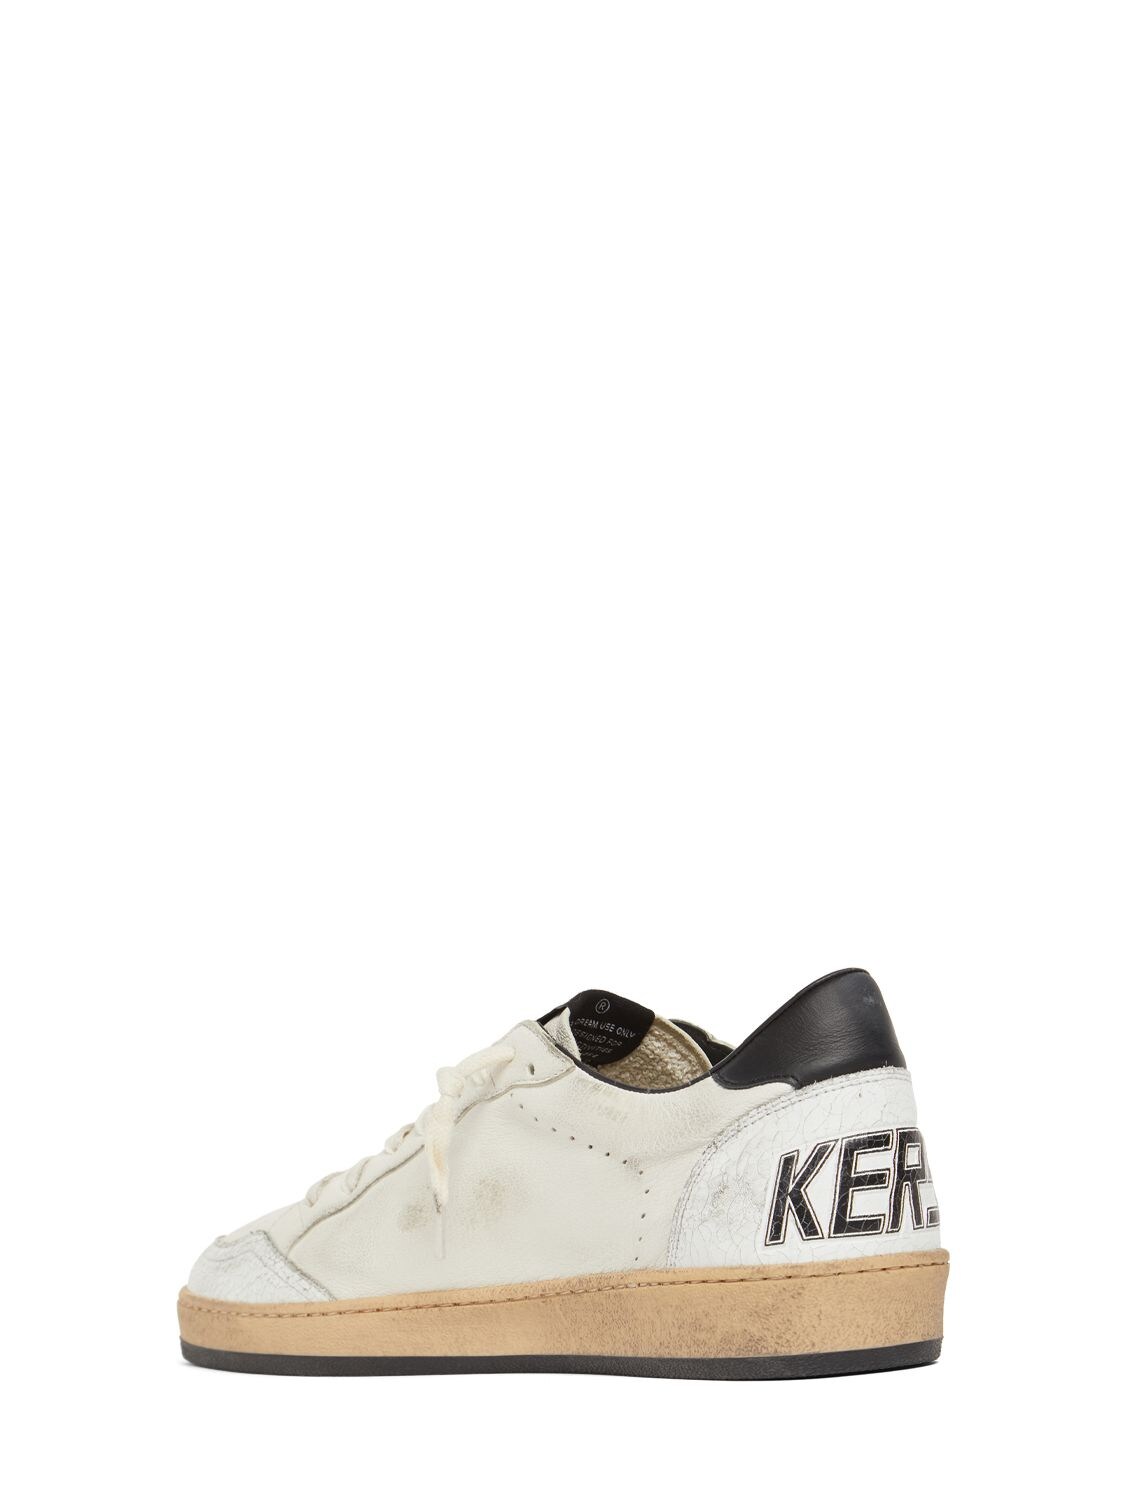 Shop Golden Goose Ball Star Nappa Leather Sneakers In White,black